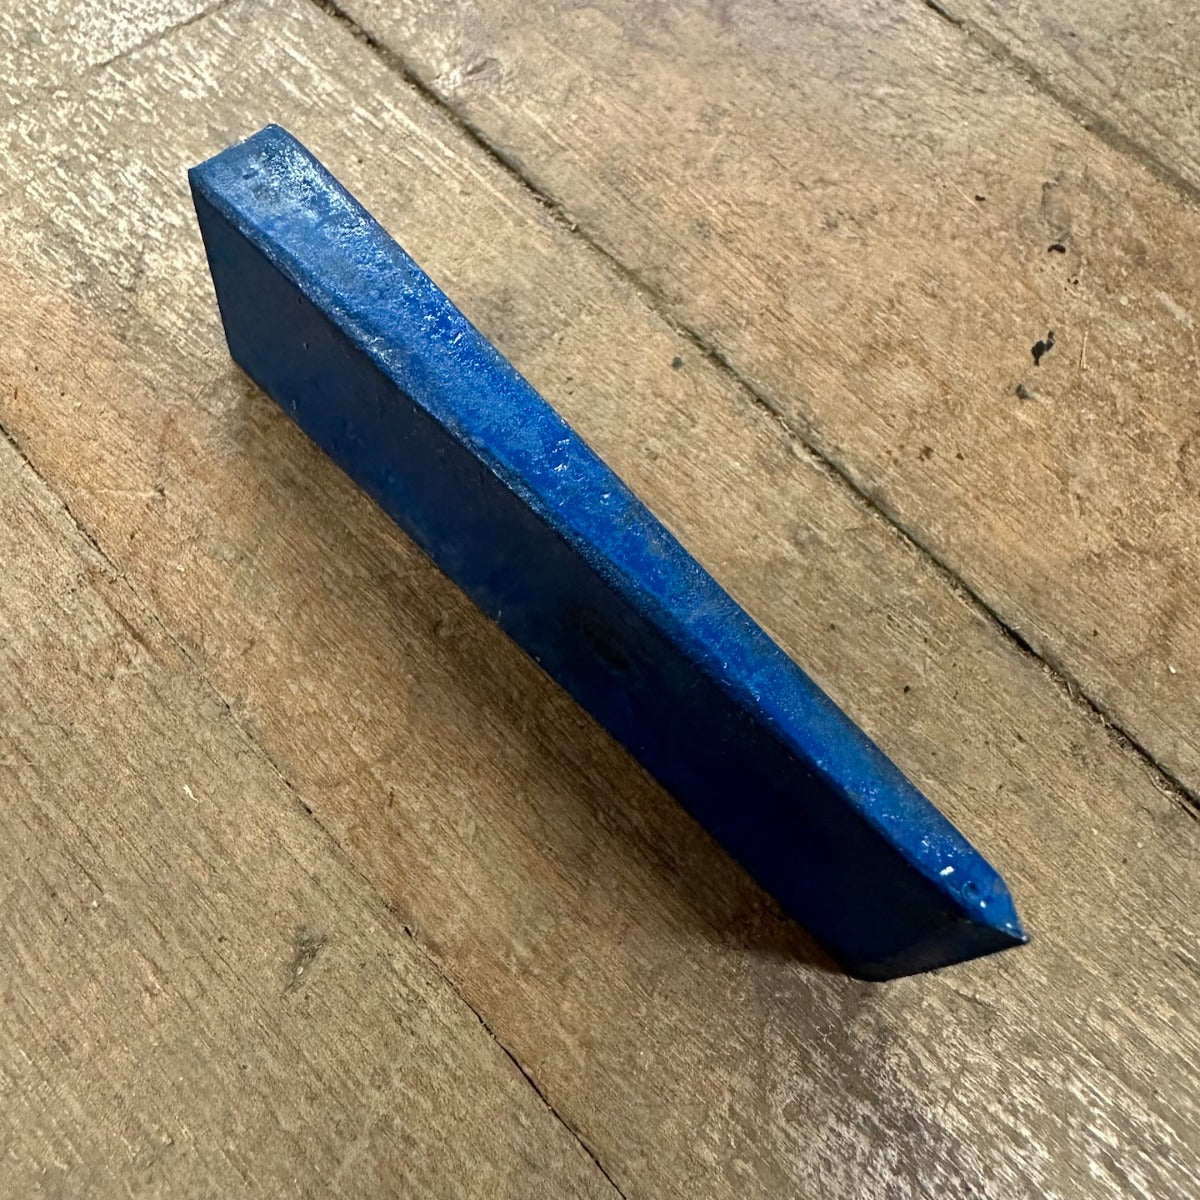 Lansing Forge 1/4" x 1" x 3" Joint Breaking "Fox" Wedge (359-03)